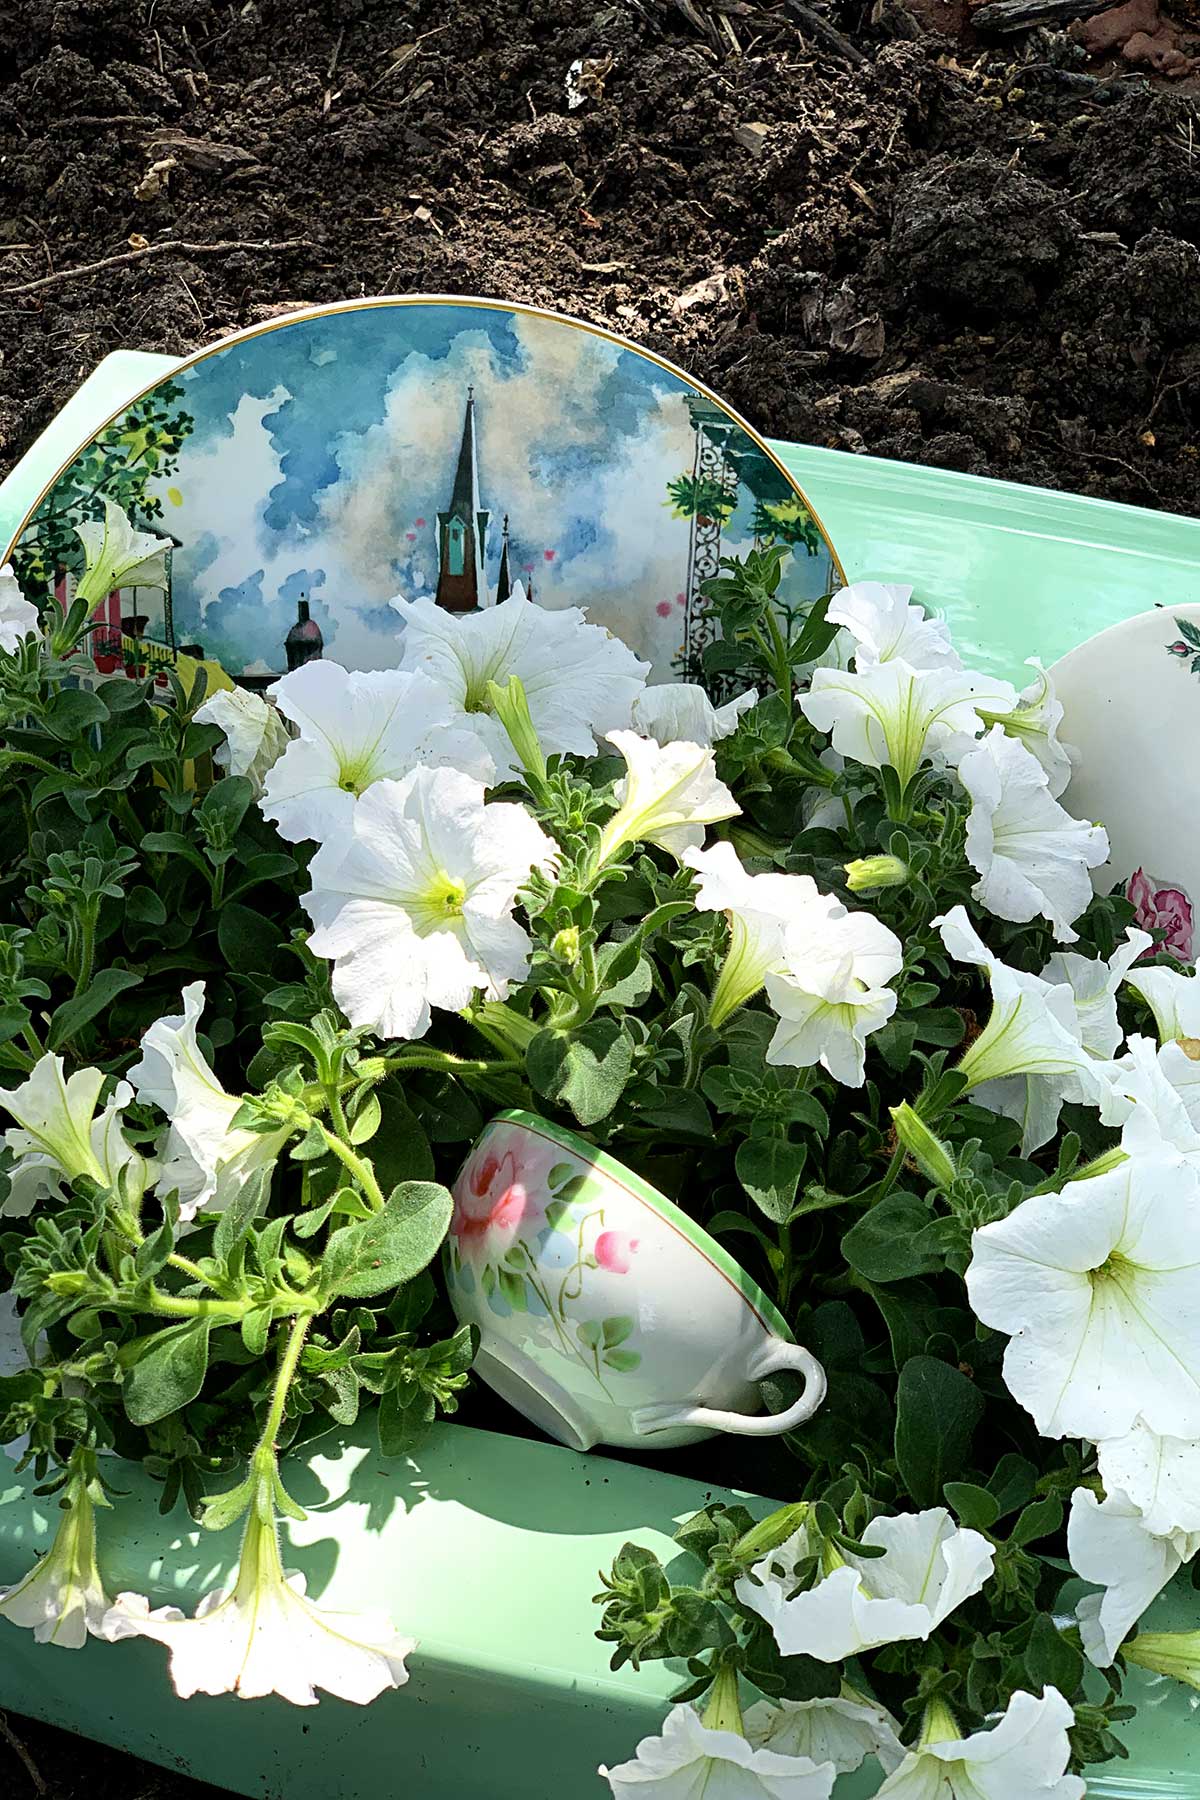 dishes and flower soap bubbles in repurposed sink turned into garden planter